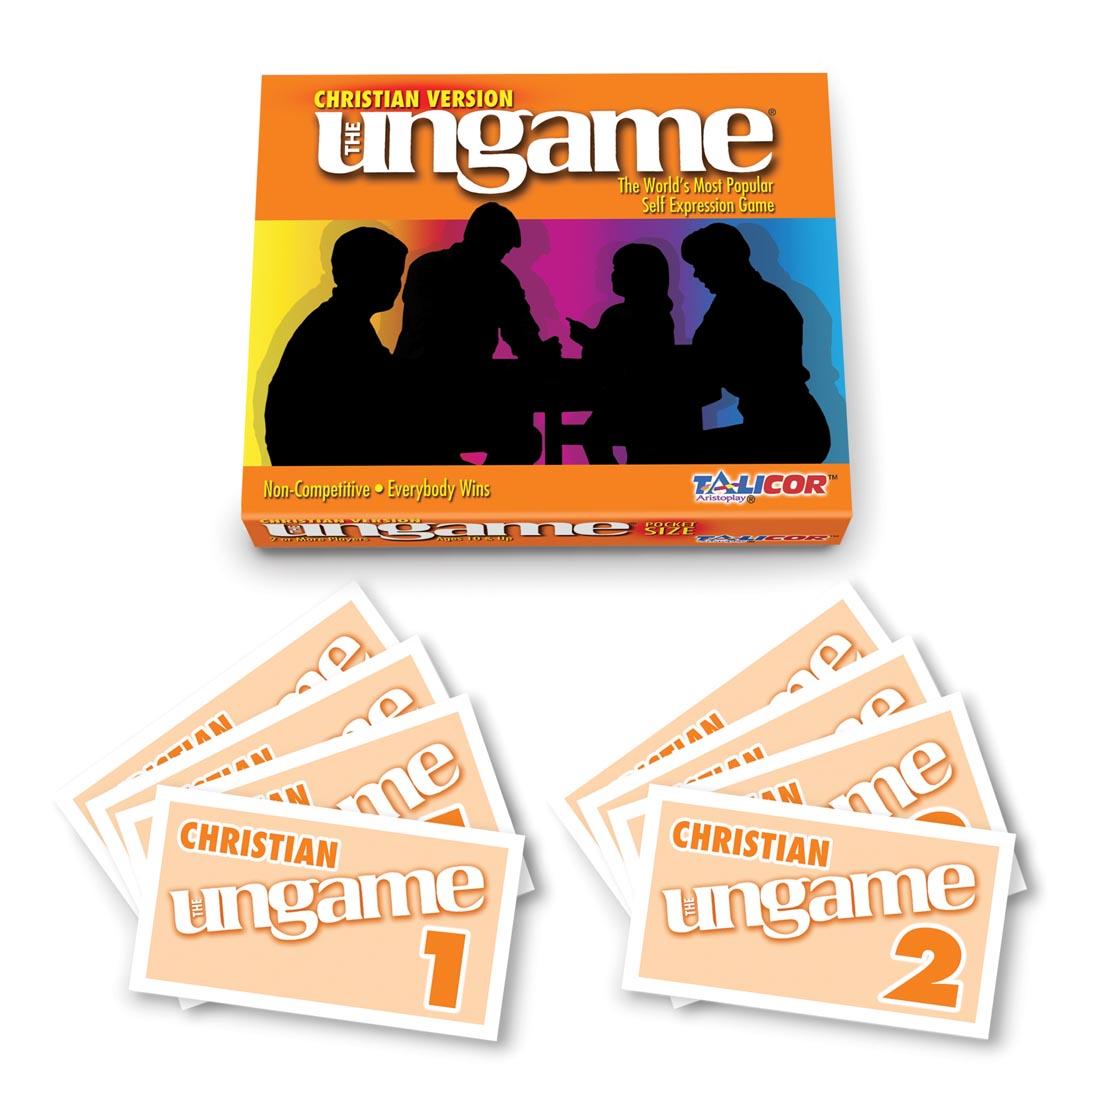 Christian Version of The Ungame by Talicor